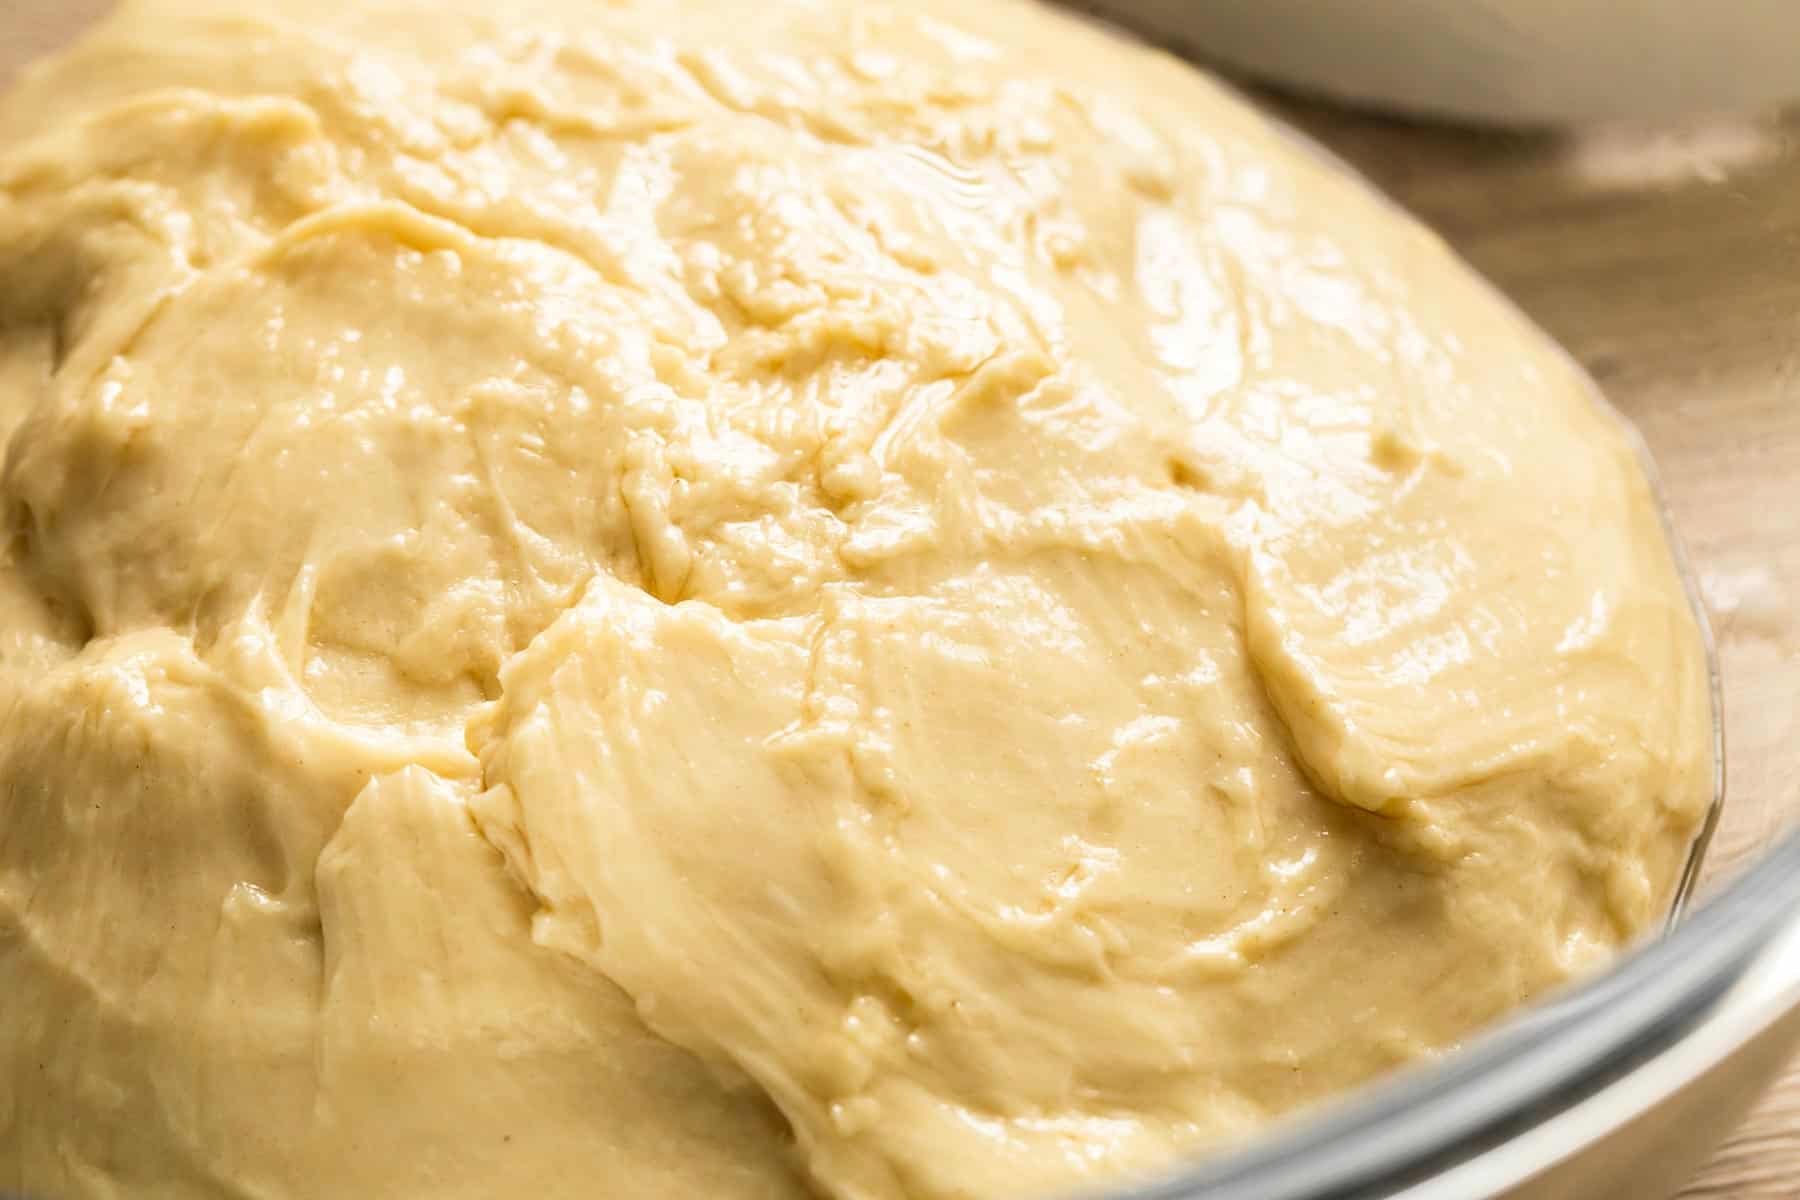 yeast dough with oiled surface in a glass bowl